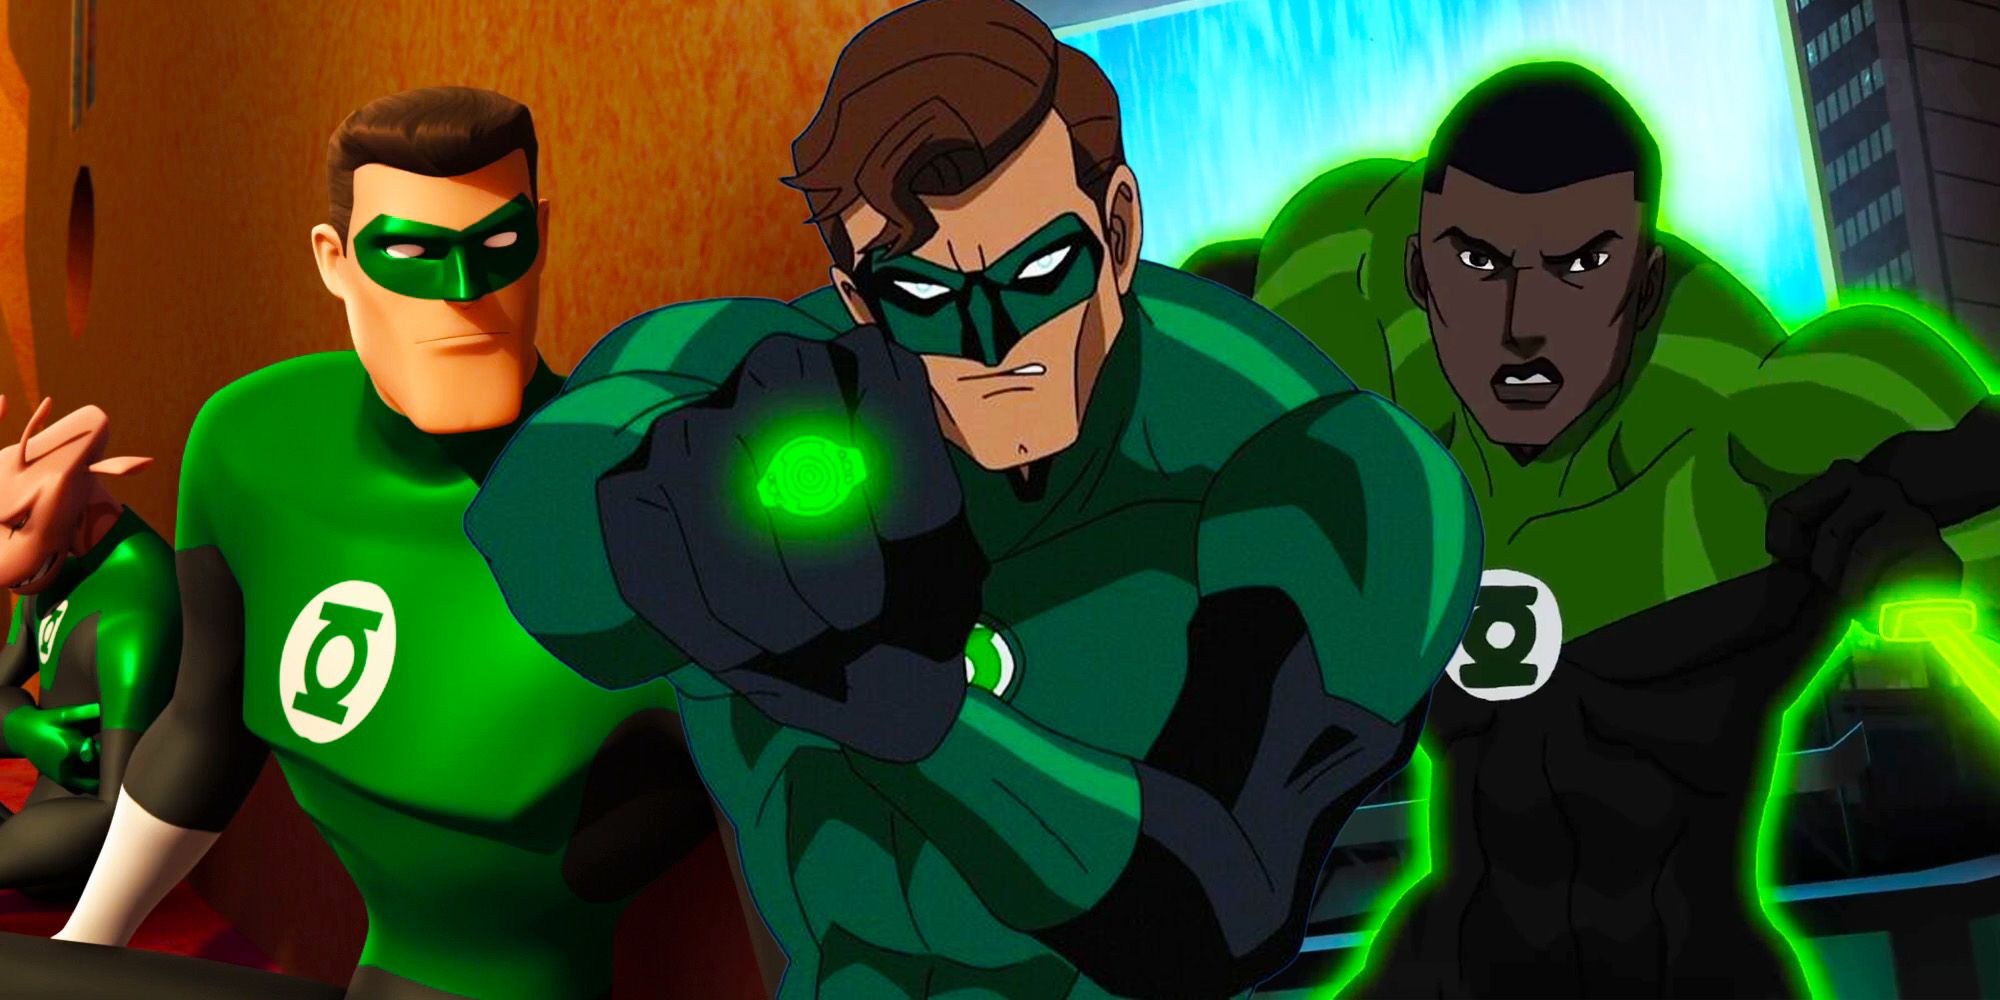 Every Animated Depiction Of Green Lanterns